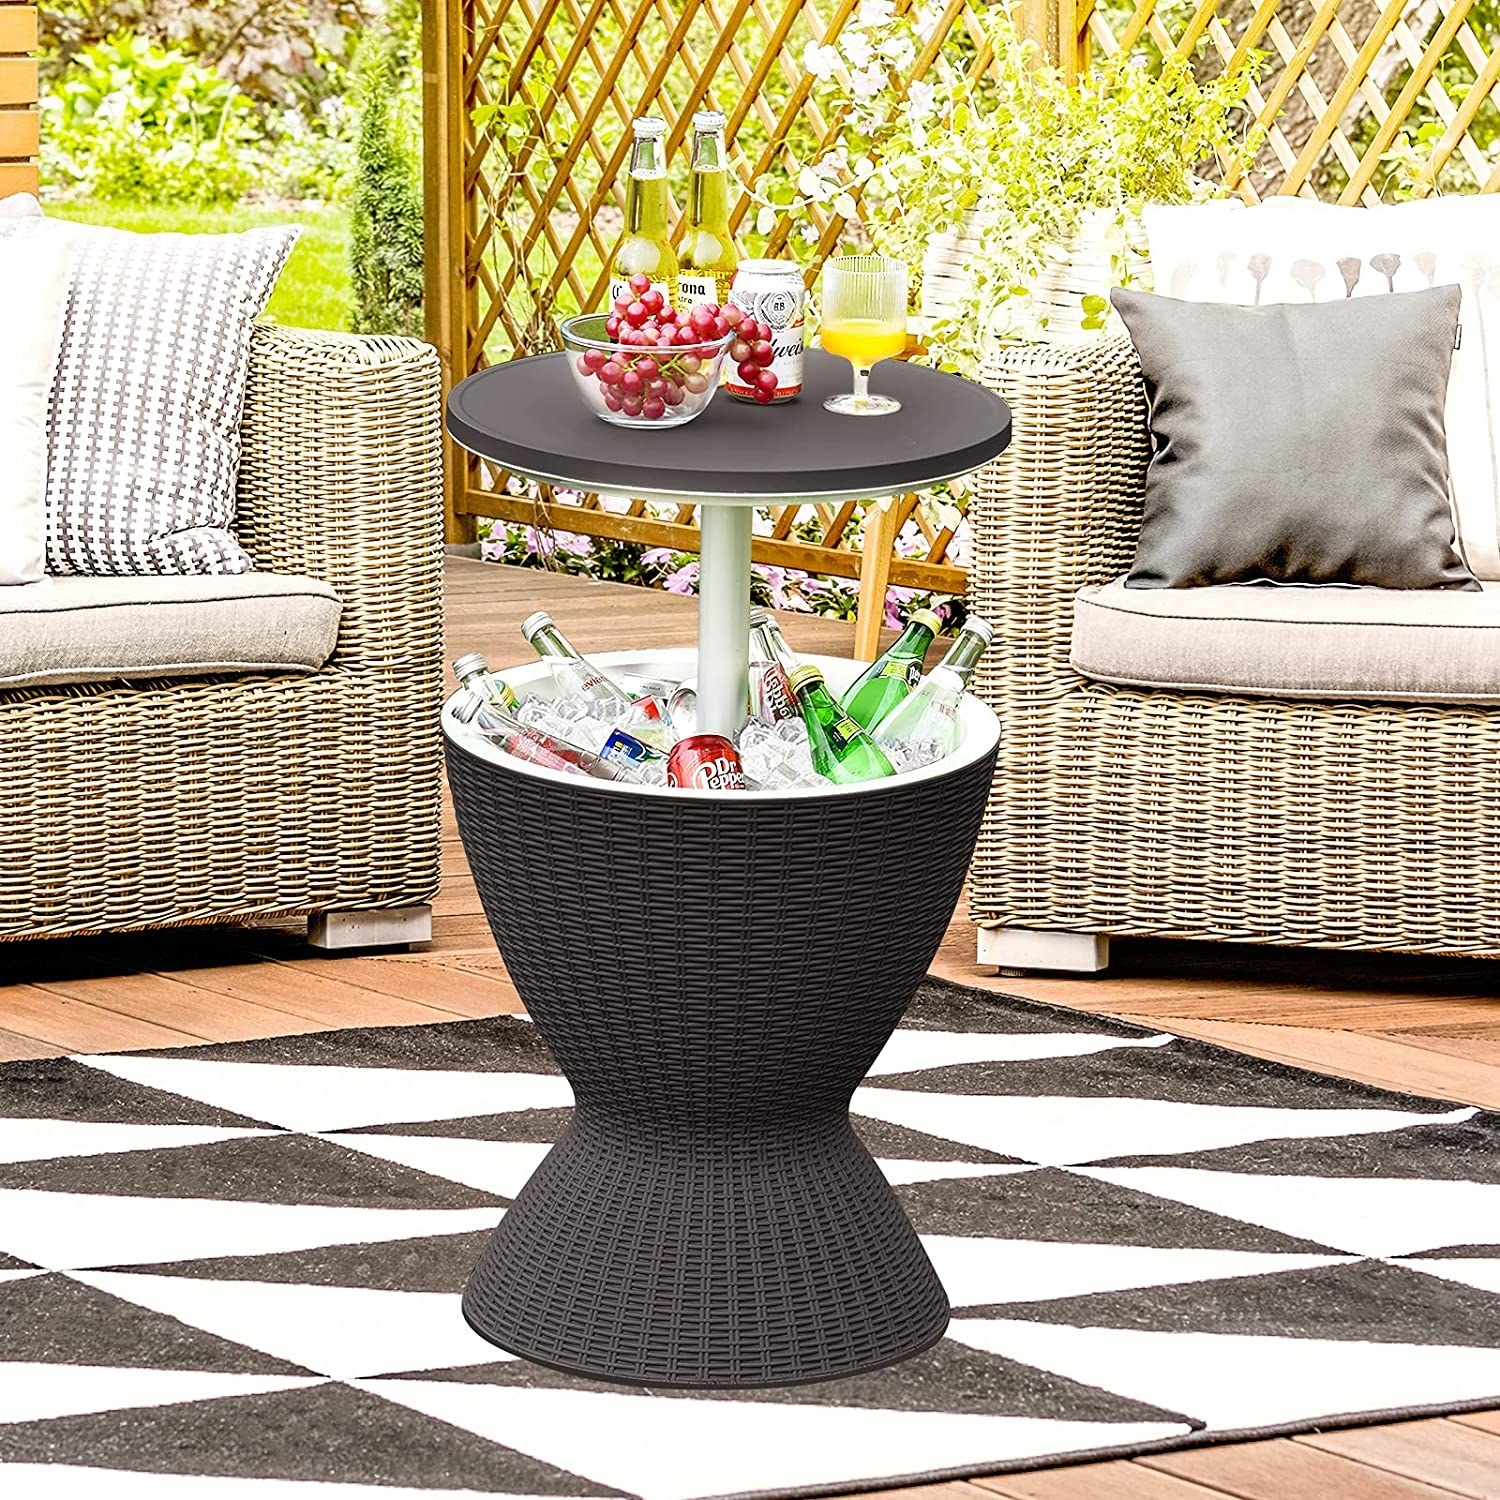 a patio table with a cooler compartment inside